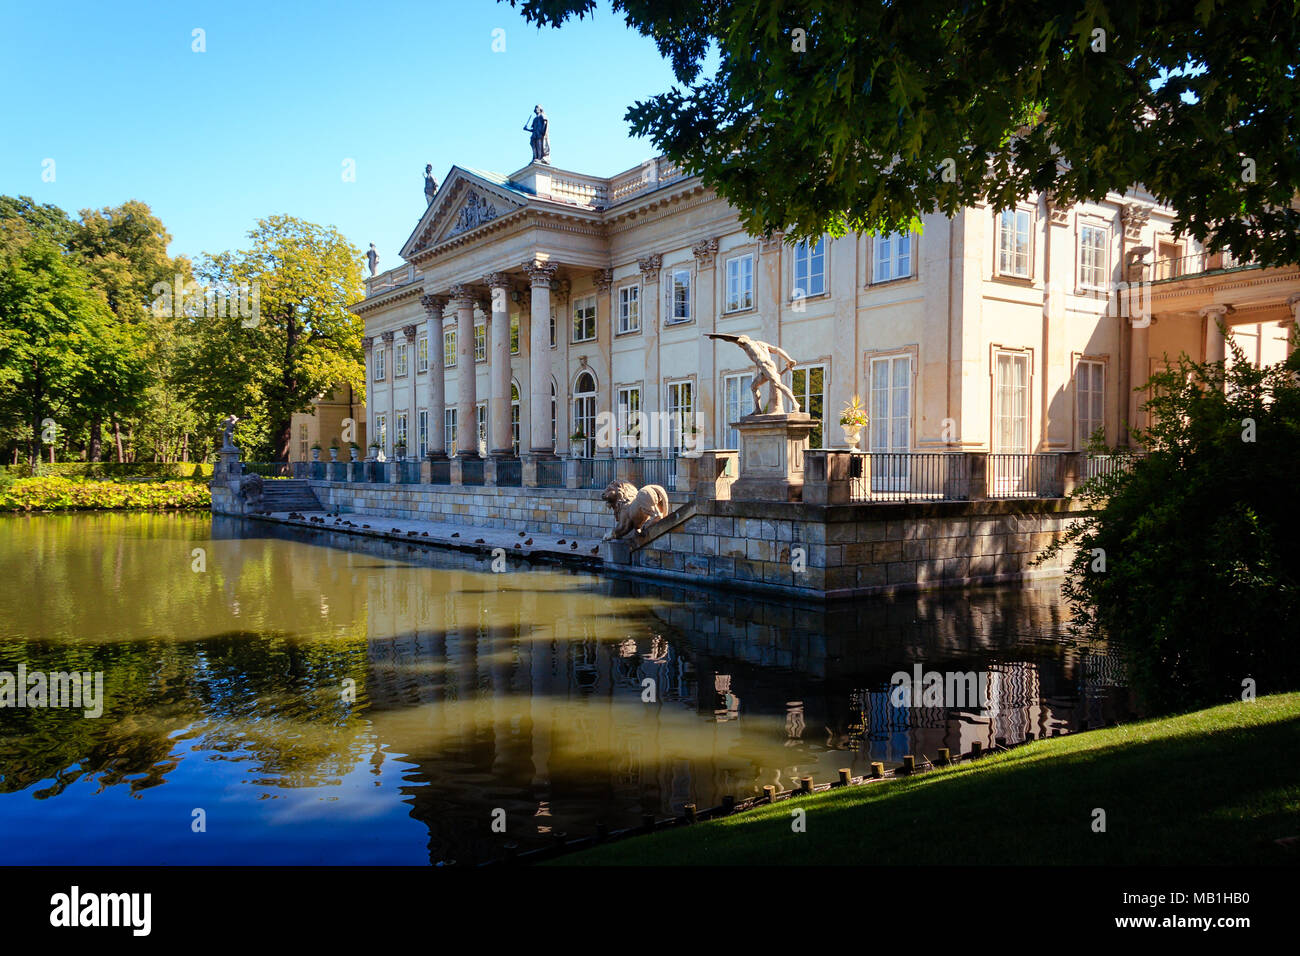 Lazienki Royal Baths Park north facade of the Palace on Isle, reflecting in the pond WARSAW, POLAND - AUGUST 20, 2009 Stock Photo